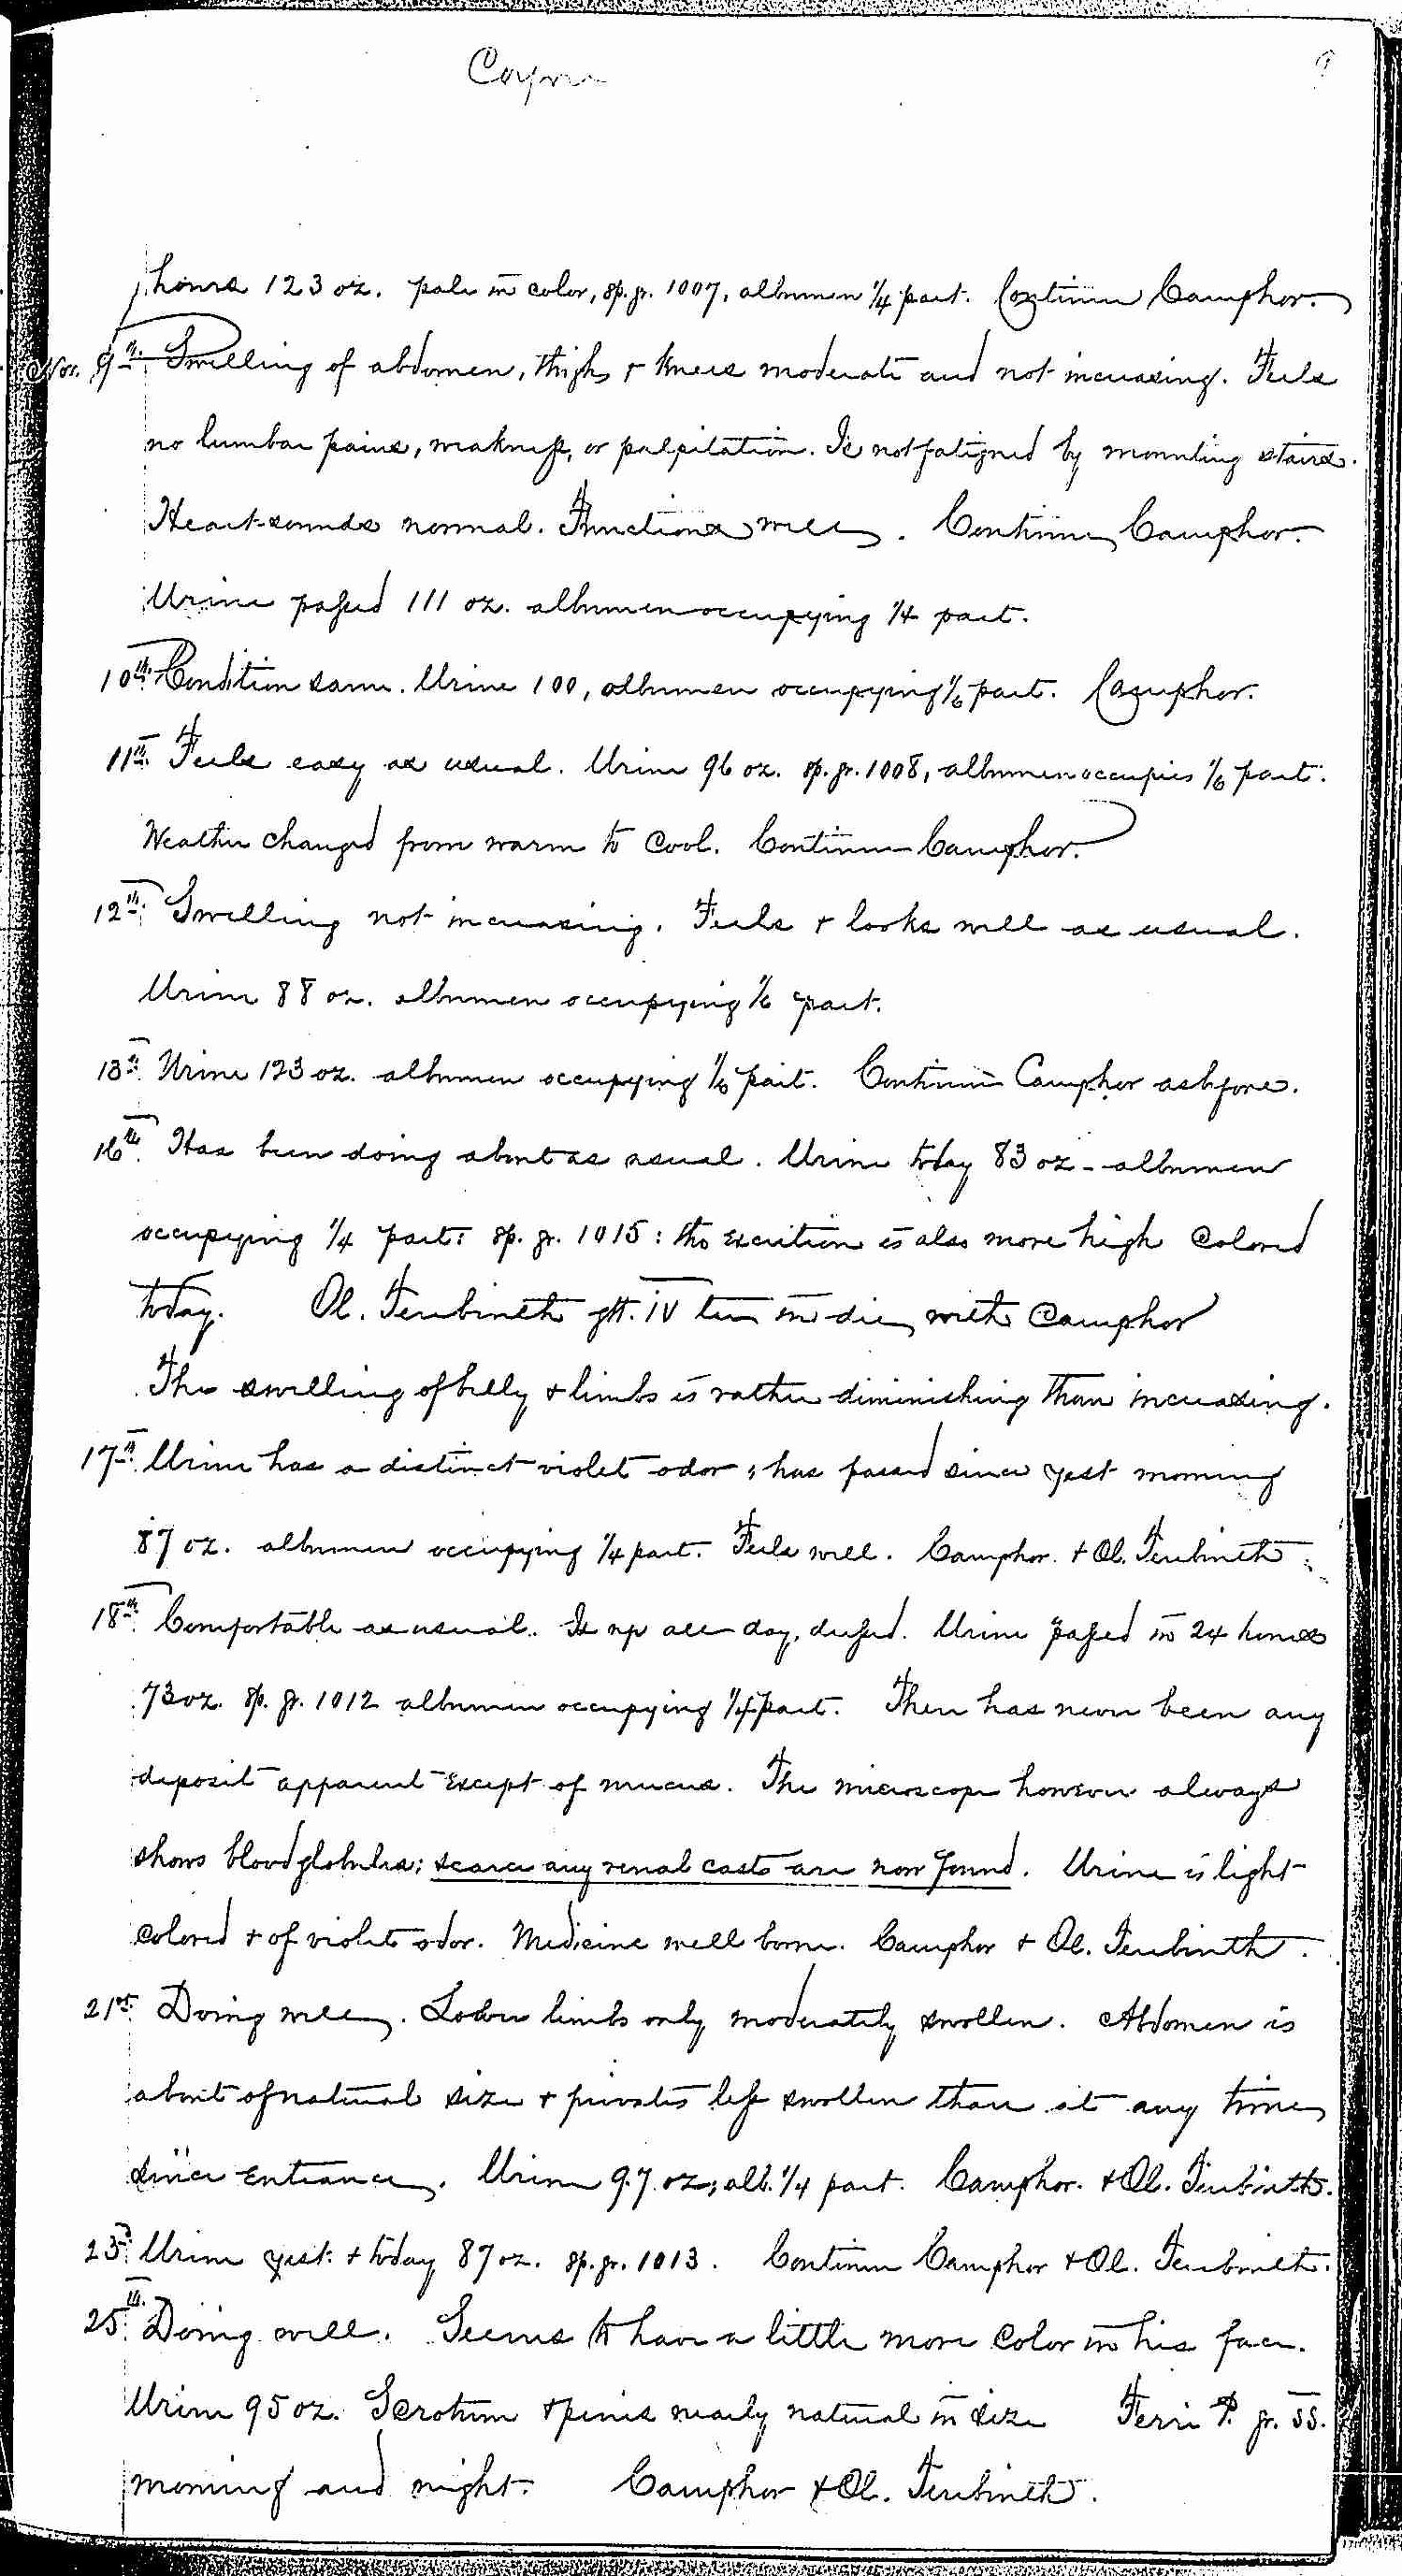 Entry for Bernard Coyne (page 9 of 13) in the log Hospital Tickets and Case Papers - Naval Hospital - Washington, D.C. - 1868-69